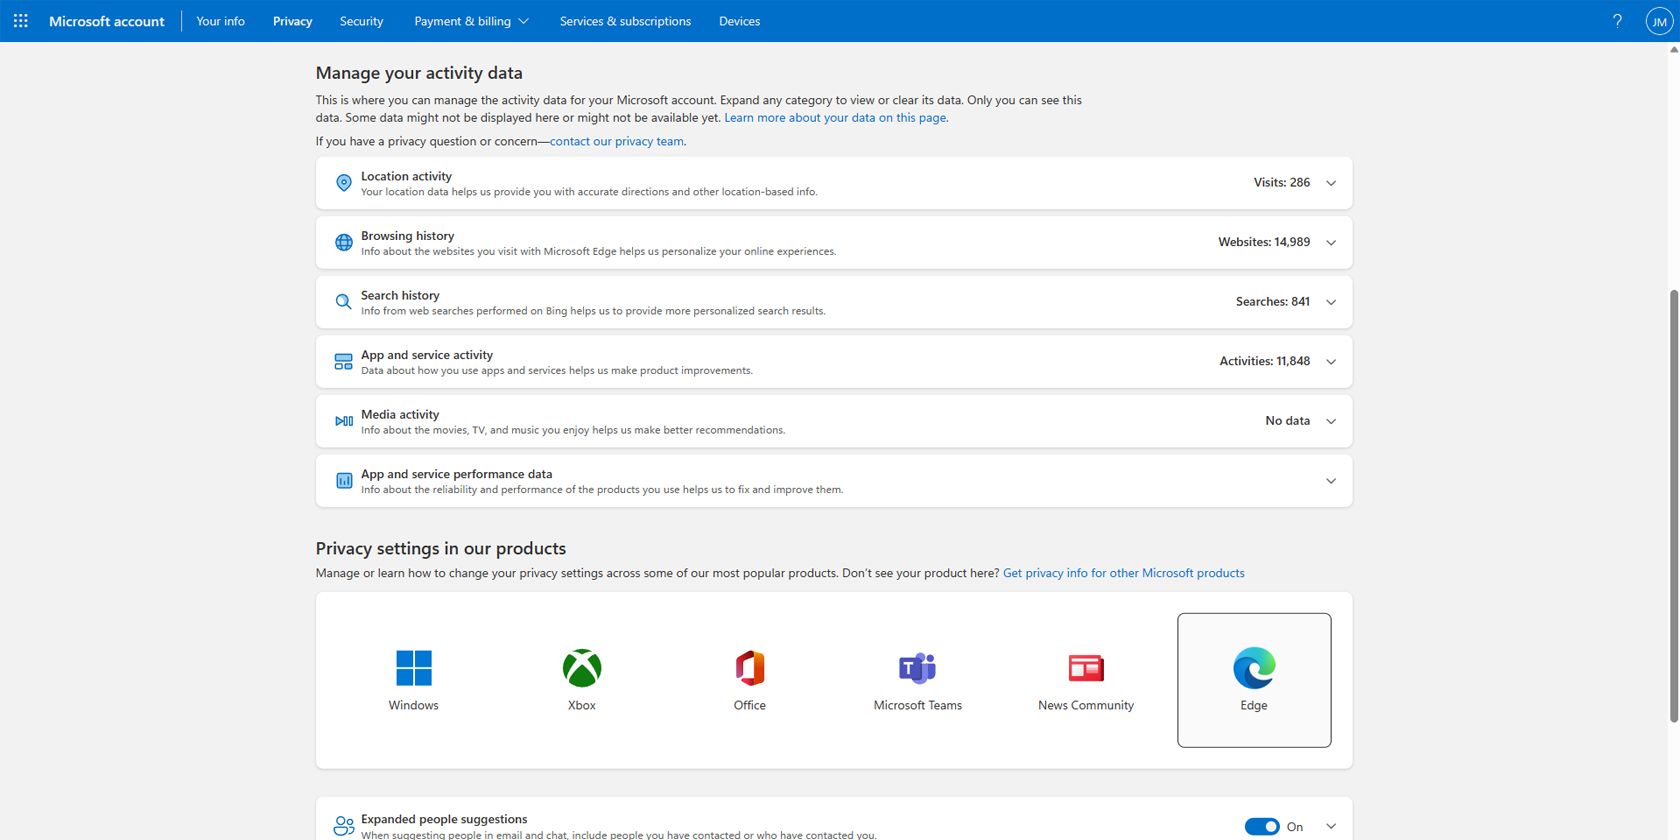 Microsoft account activity data management page